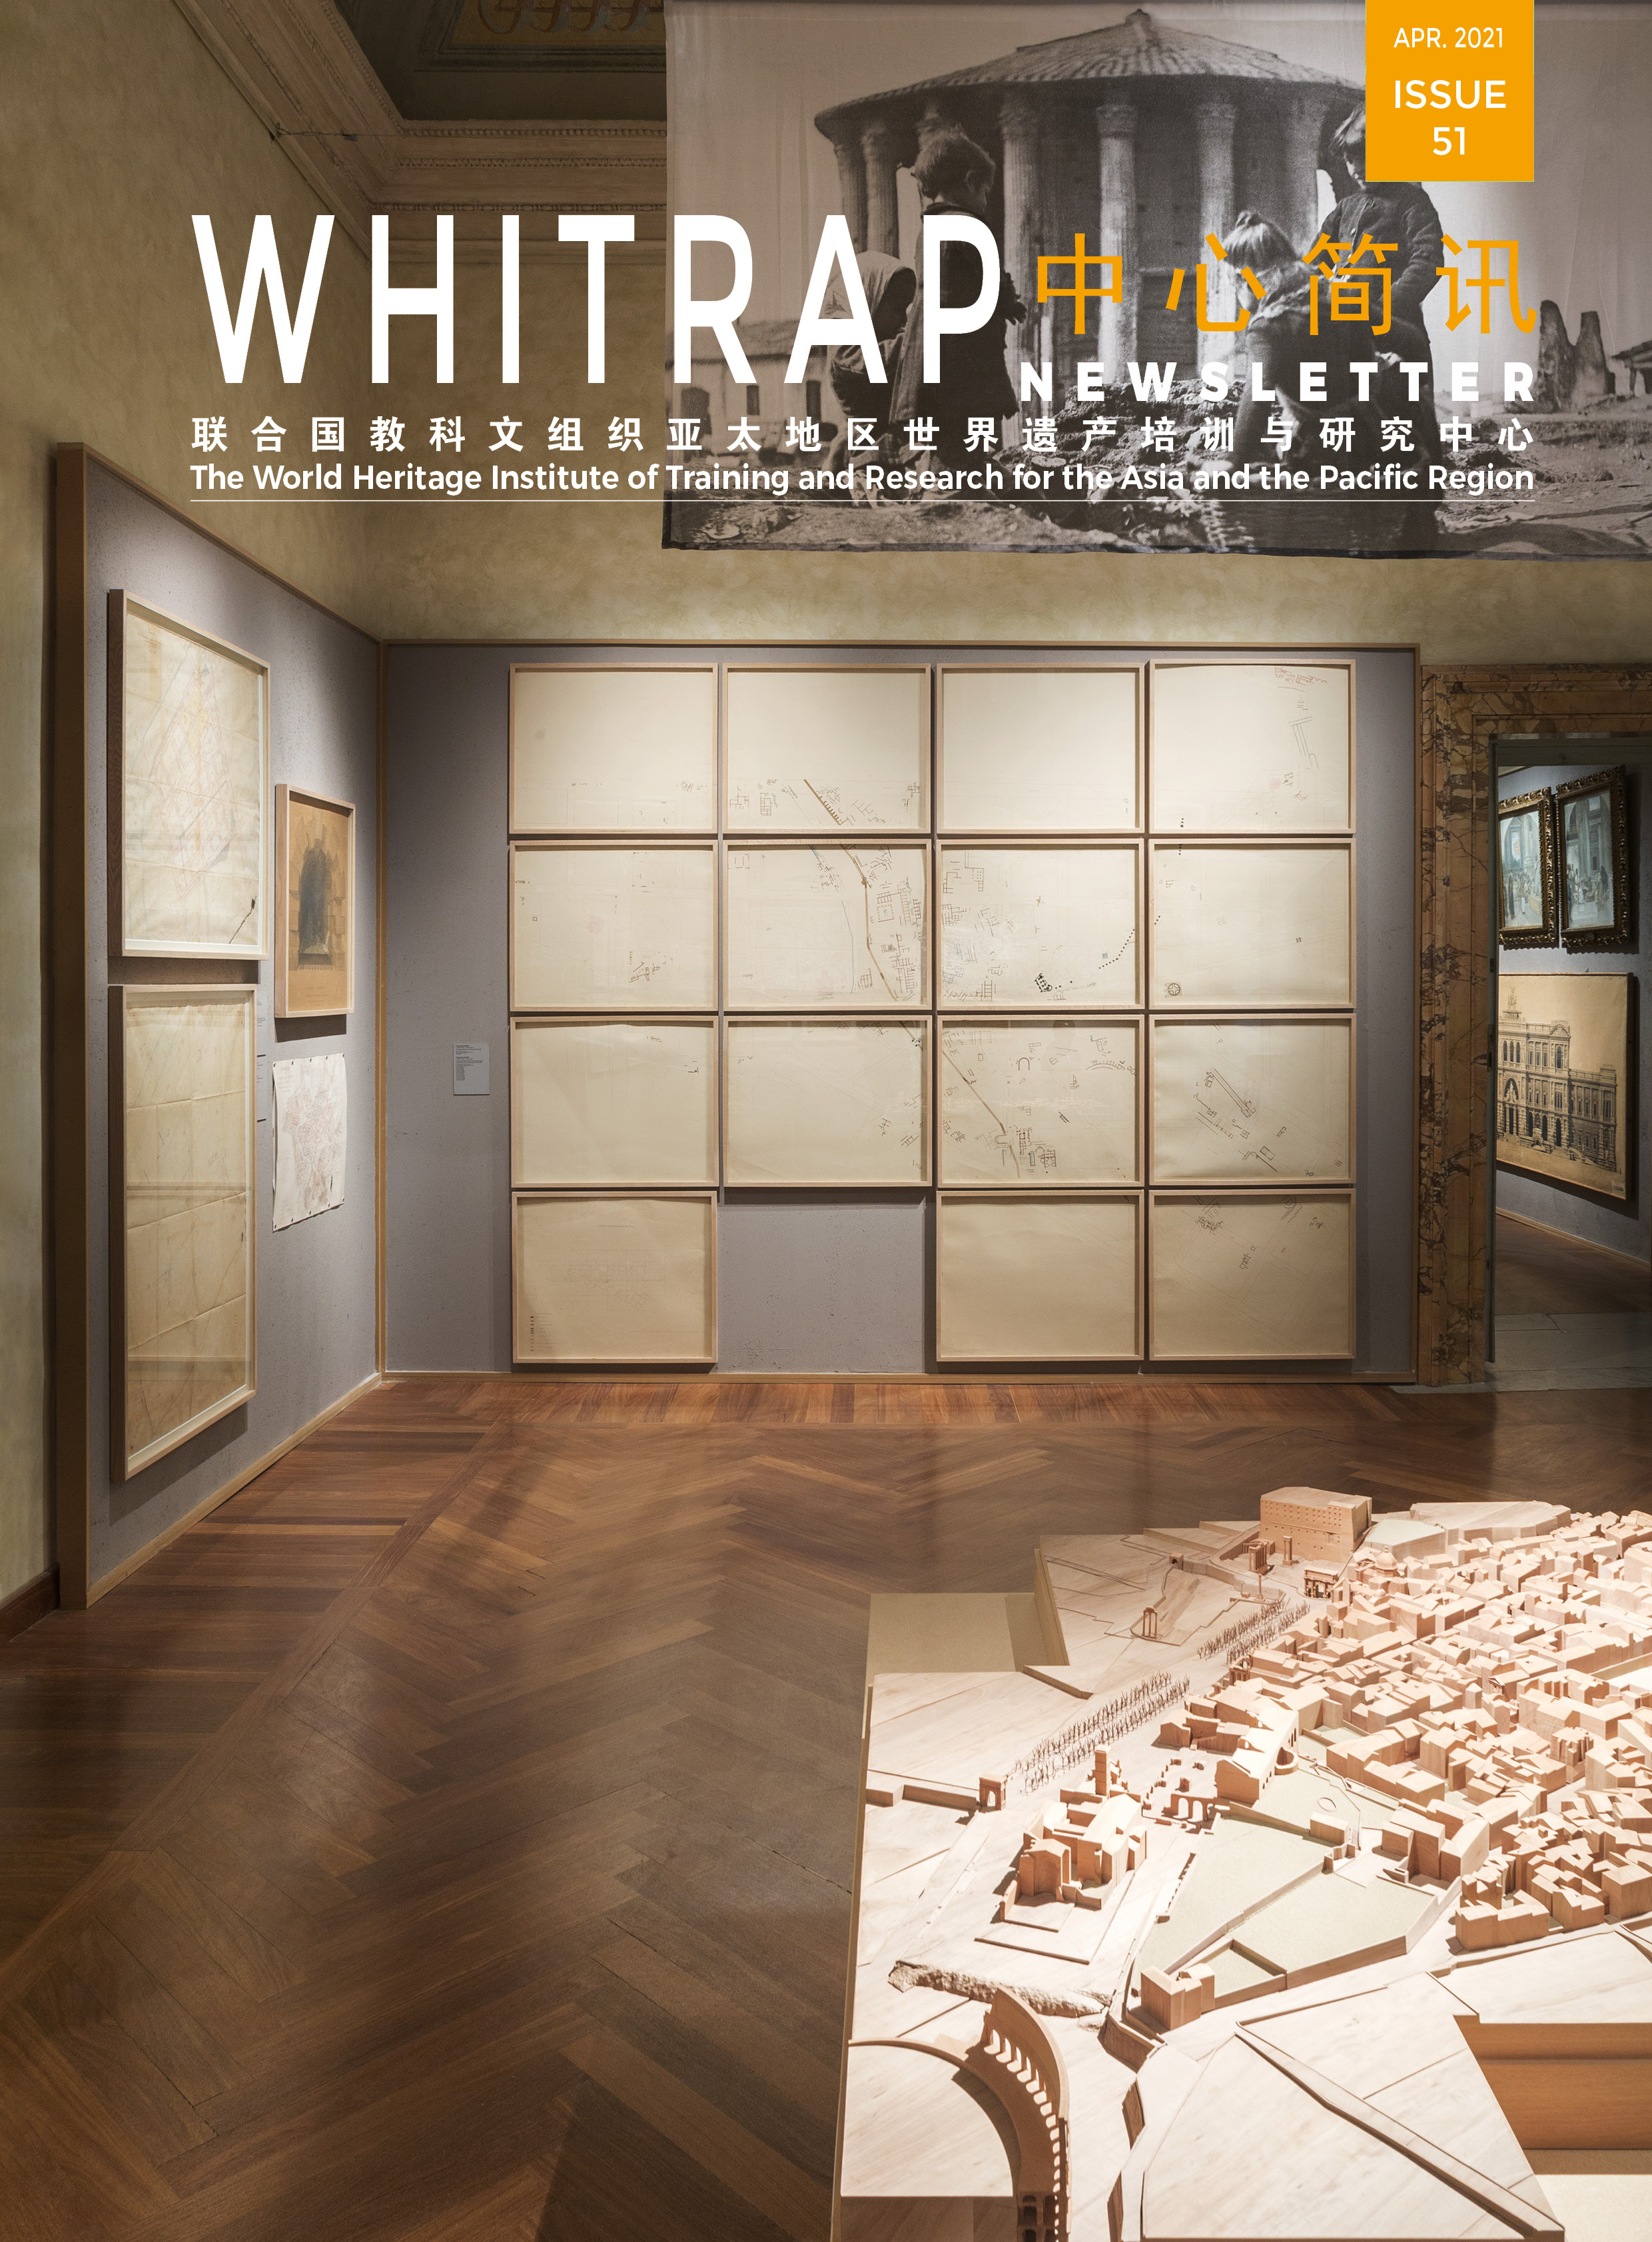 WHITRAP Newsletter (Issue 51)